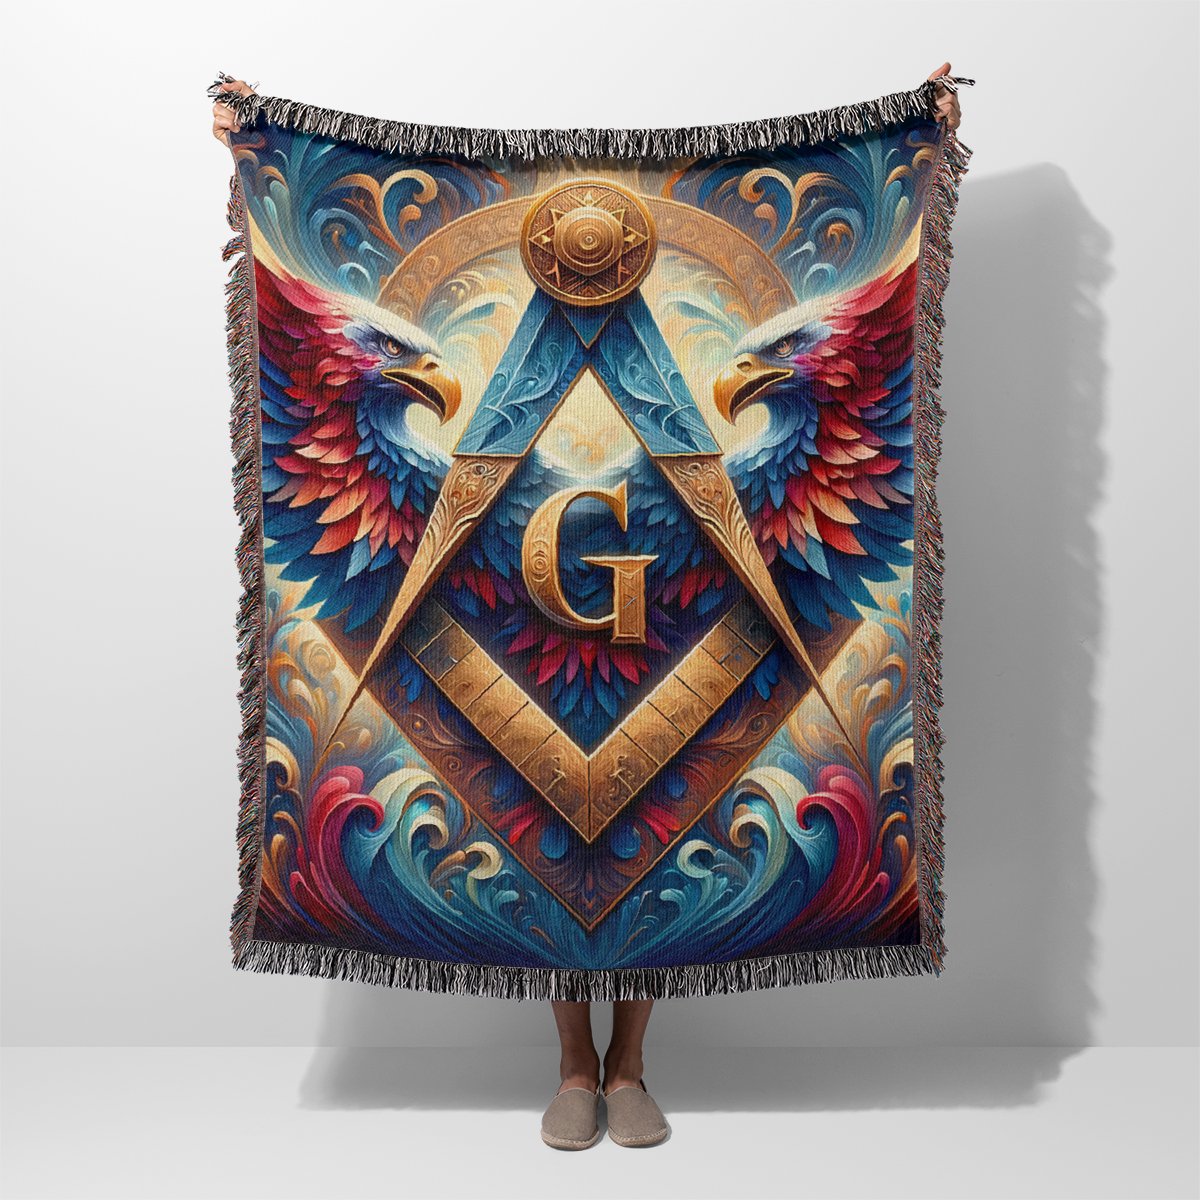 The Double-Headed Eagle with Square & Compass Heirloom Woven Blanket